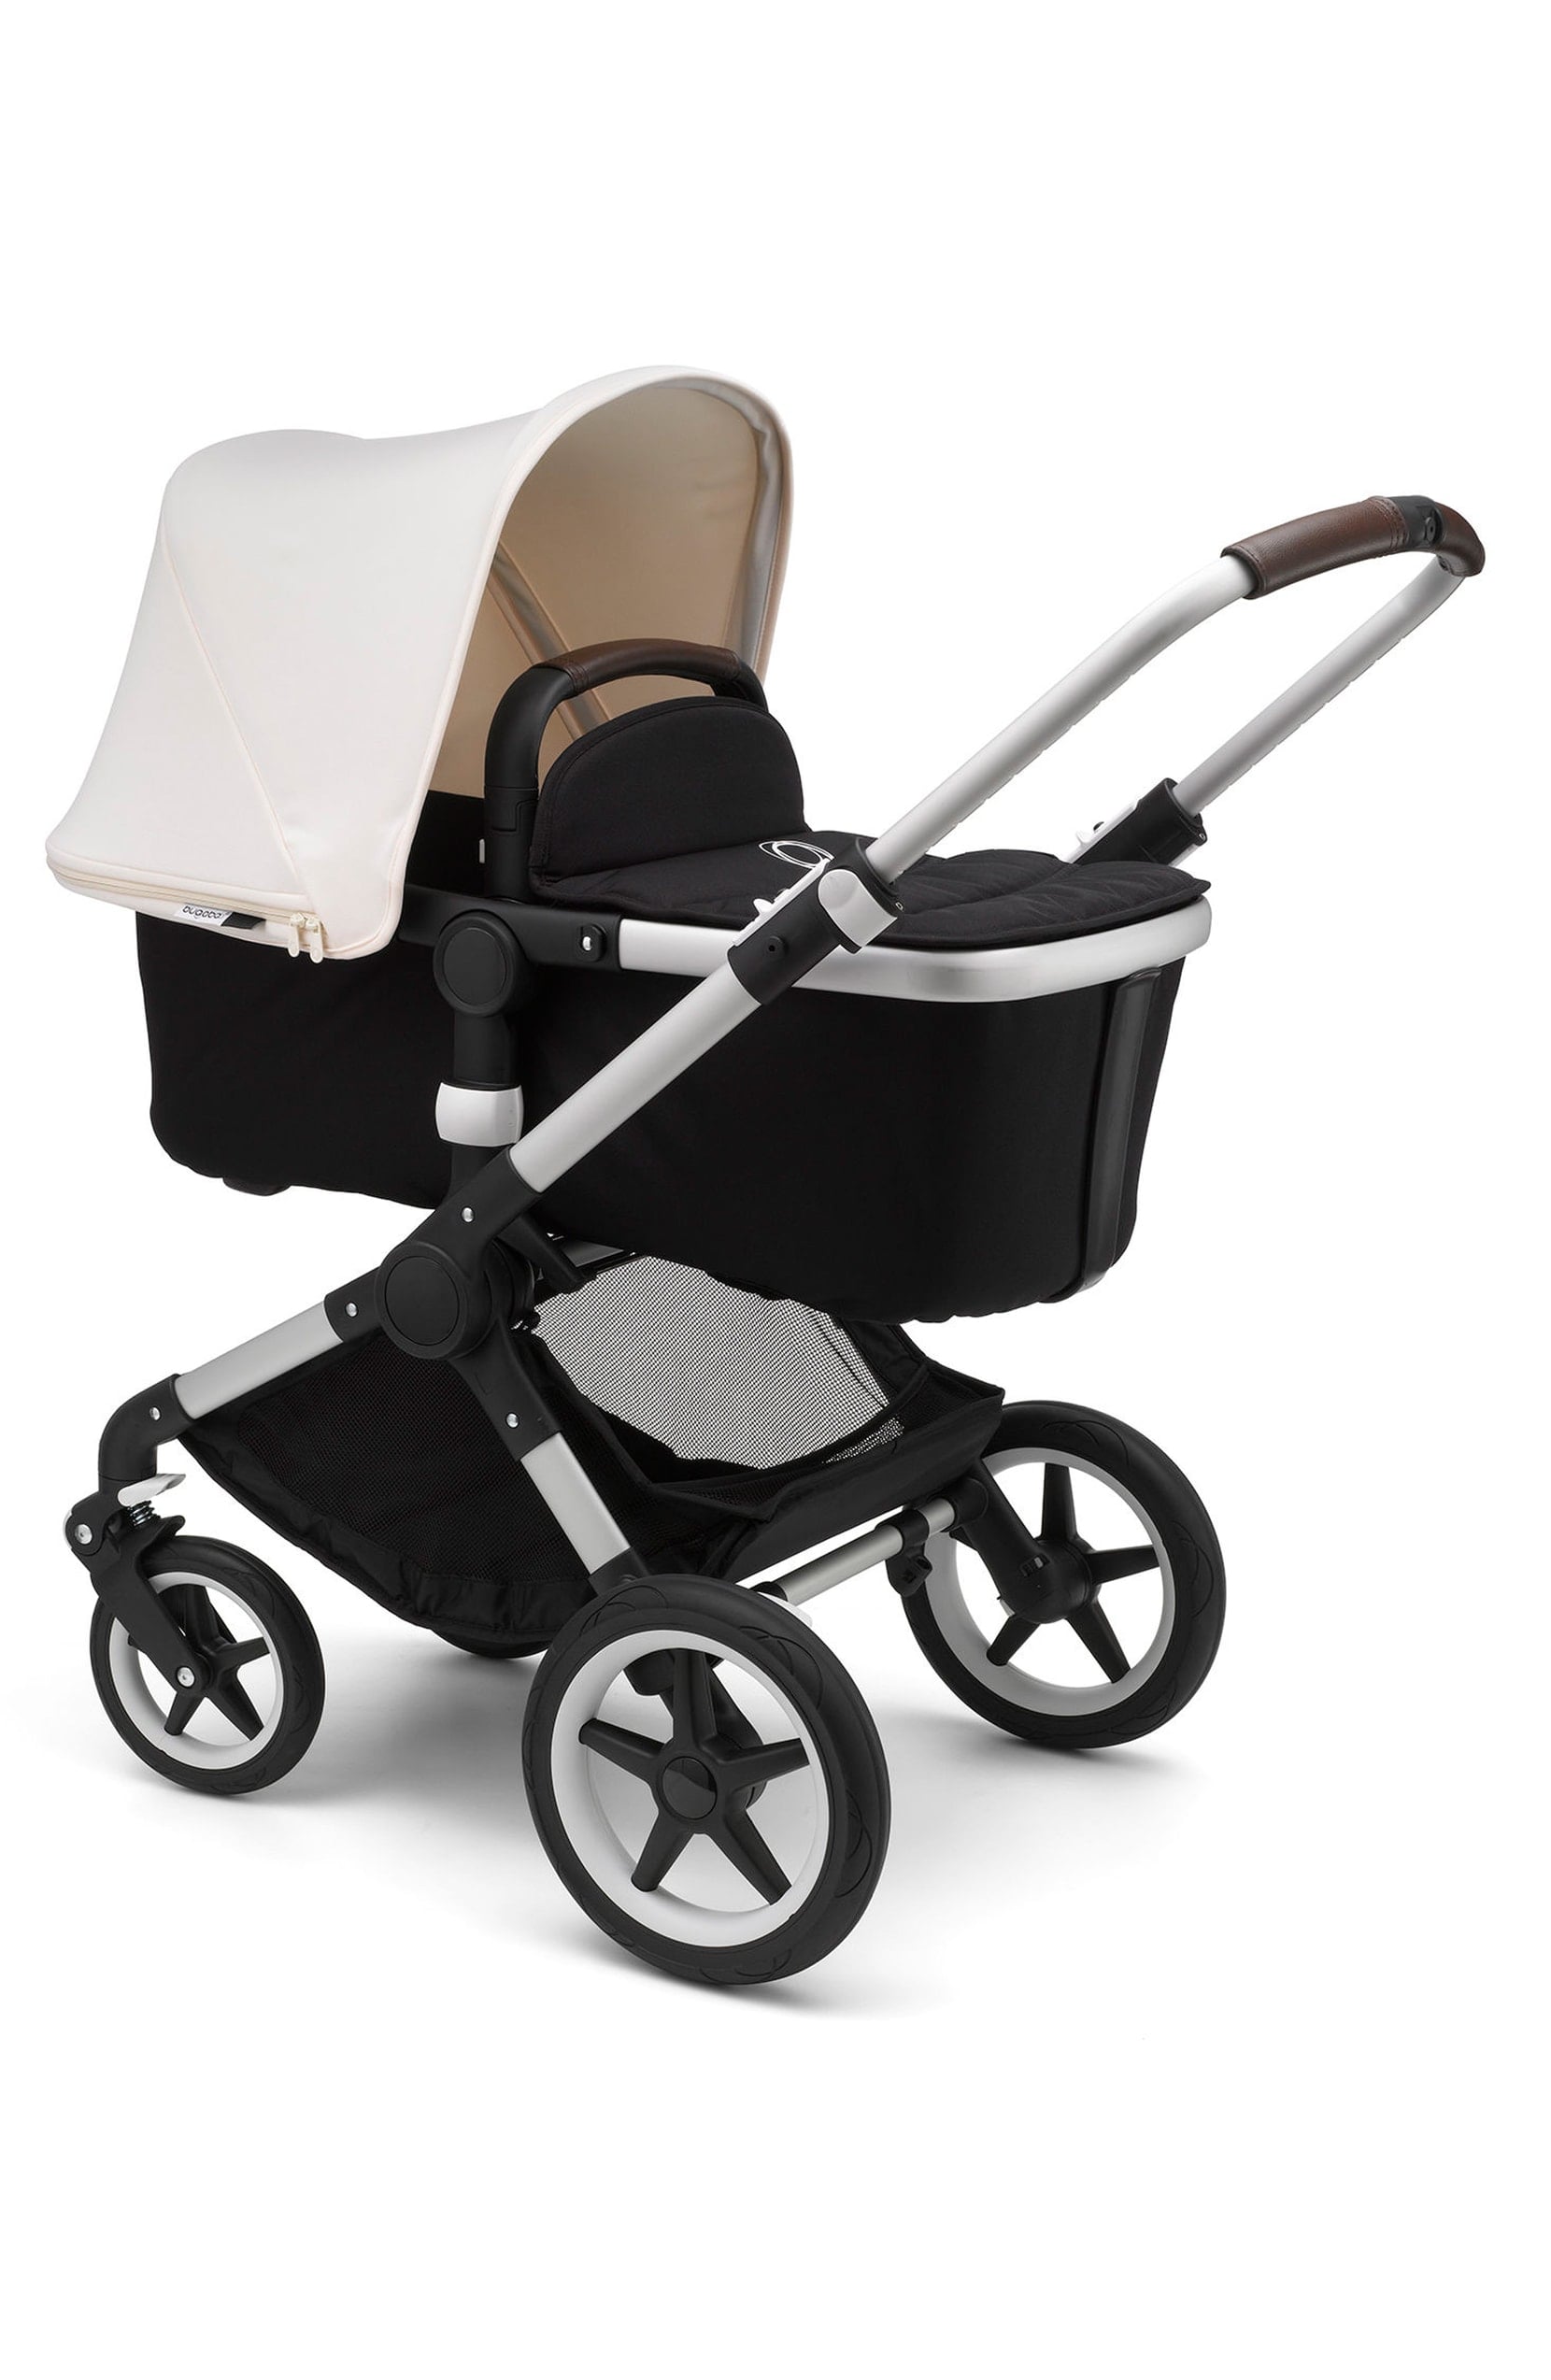 <p><strong>The <a href="http://www.bugaboo.com/us-en/strollers/bugaboo-fox-5/bugaboo-fox-5-bassinet-and-seat-stroller-PM006095.html" class="ga-track">Bugaboo Fox 5 bassinet and seat stroller</a> (<strong>$1,299</strong>)</strong>This is the Rolls-Royce of strollers. And it's not only super stylish but also extremely usable. The puncture-proof, all-terrain wheels provide a smooth ride for both parent and child, even through snow or sand. The ergonomically designed seat, one of the most comfortable we've ever seen, is placed high, making it easier to lift your child in and out.</p> <p>This is personal favorite of Fitness and Wellness Video Director Genevieve Farrell who has an 18-month-old at home. "It's awesome - comfortable, smooth, and you can adjust the stroller's handlebar, recline the seat, or fold it away with only one hand, which is very helpful when holding a baby," she says. </p>